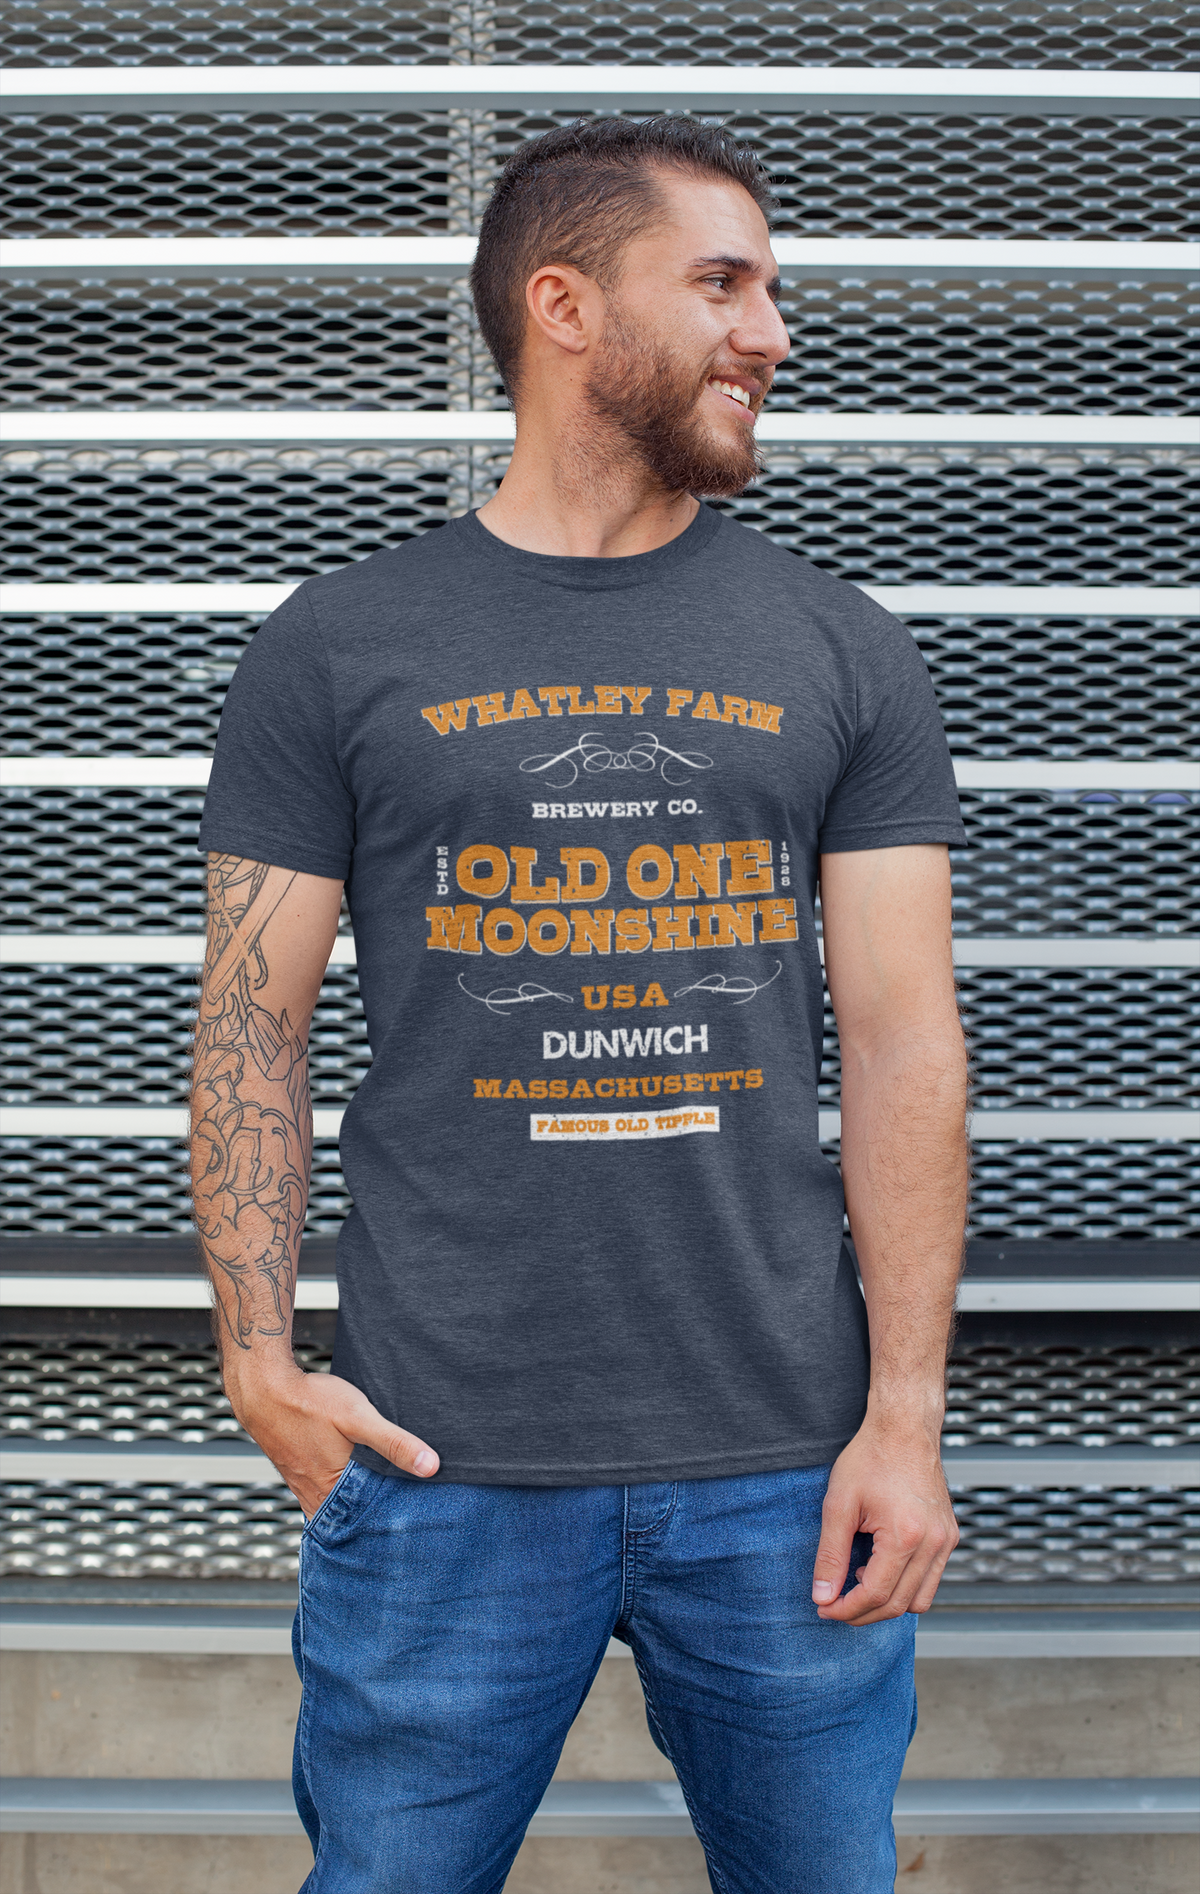 The Dunwich Horror HP Lovecraft Themed T Shirt "T-Shirts With a Backstory"